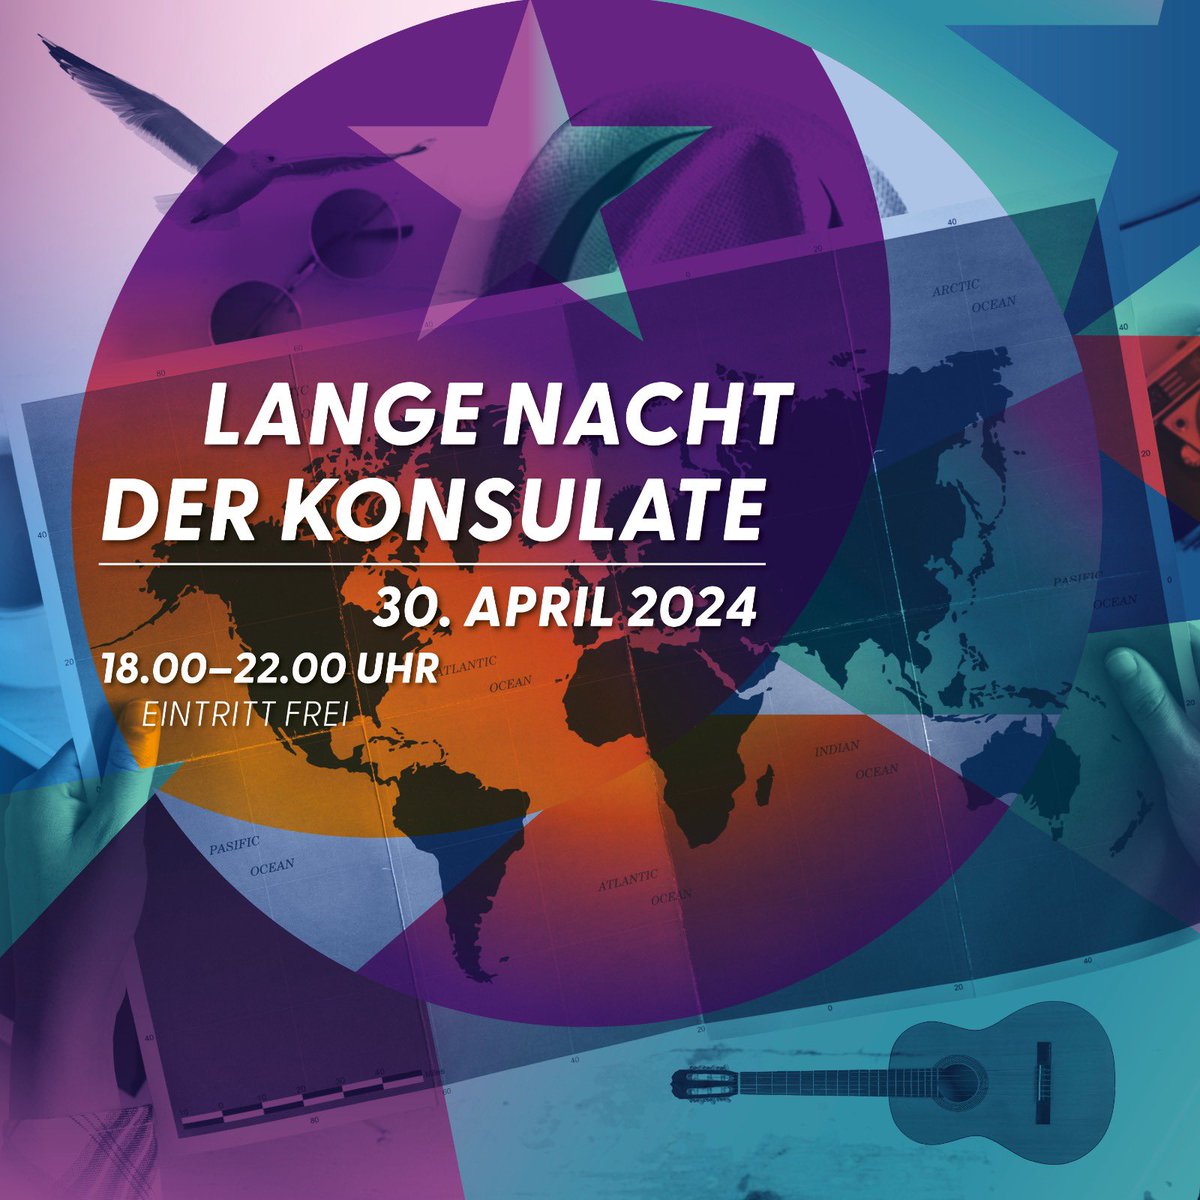 Join us for Lange Nacht @IndiainHamburg and experience a world of culture, tradition, tourism & celebration. An unforgettable evening of vibrant colors, rhythmic beats, and unforgettable memories. 🇮🇳 #LangeNacht #IndianConsulate